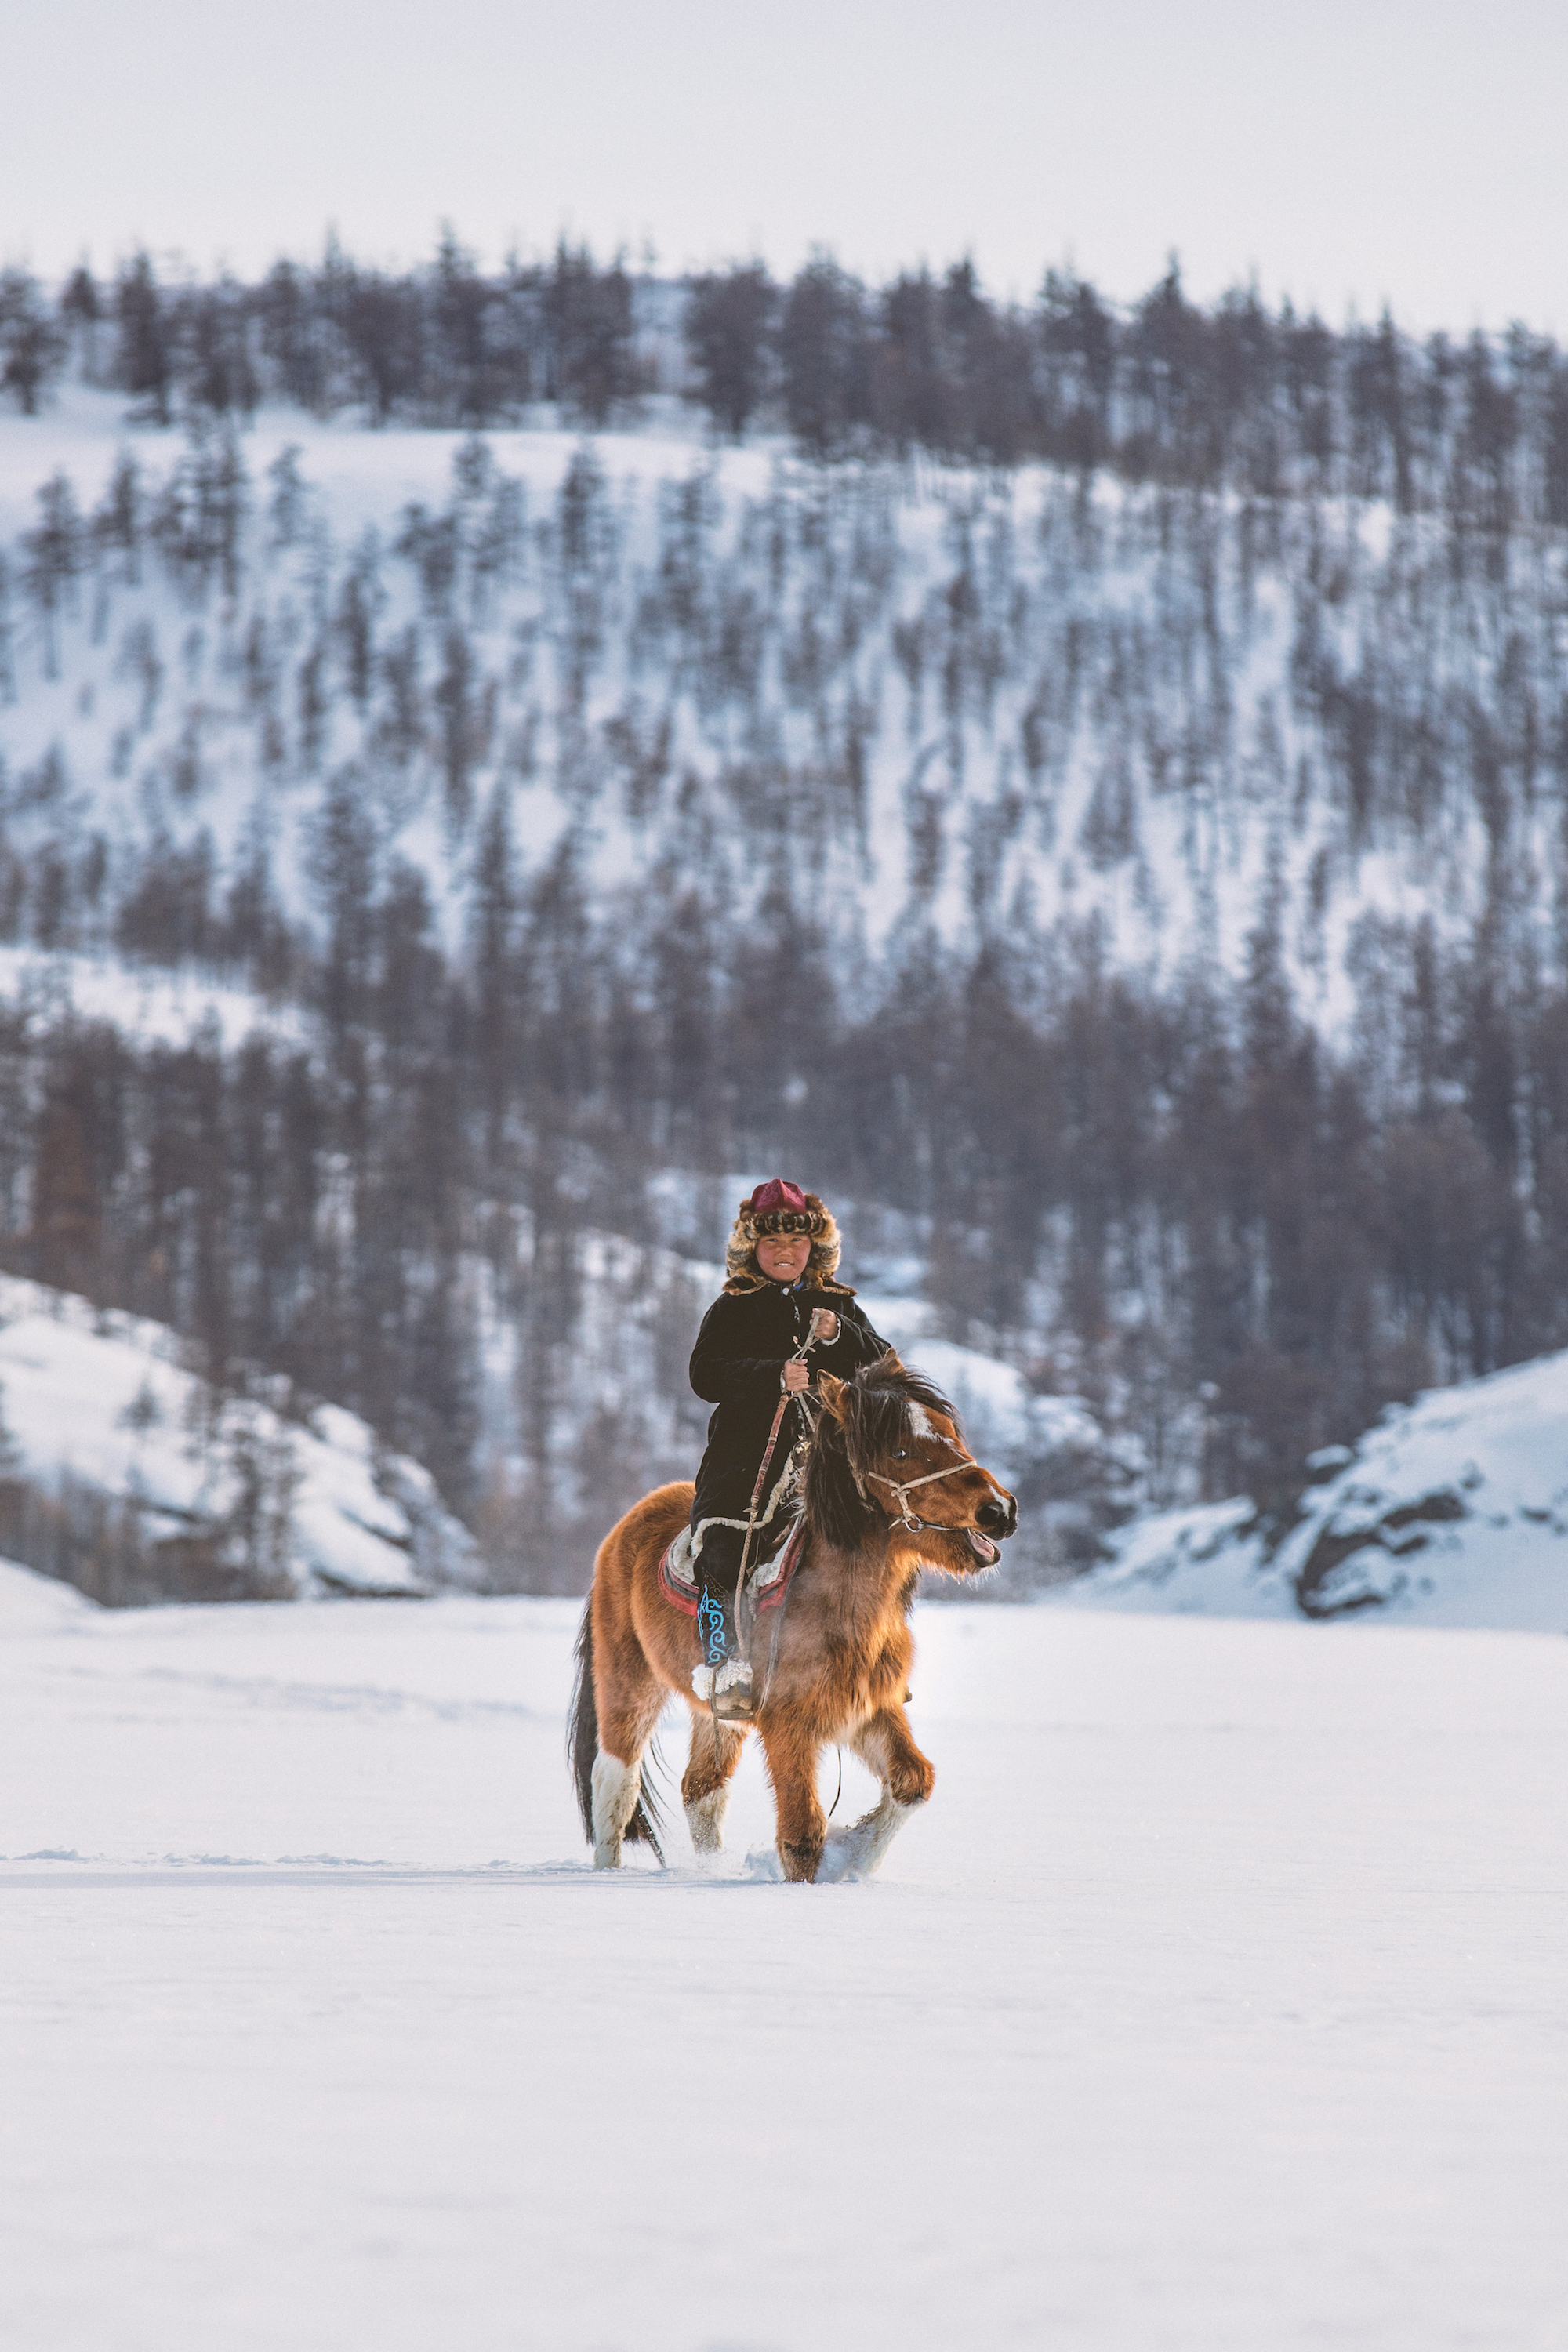 Janibek, a 9-year old Kazakh nomad, winter in the Altai Mountains, Western Mongolia_Boy_Nomad_aAron_Munson.jpg